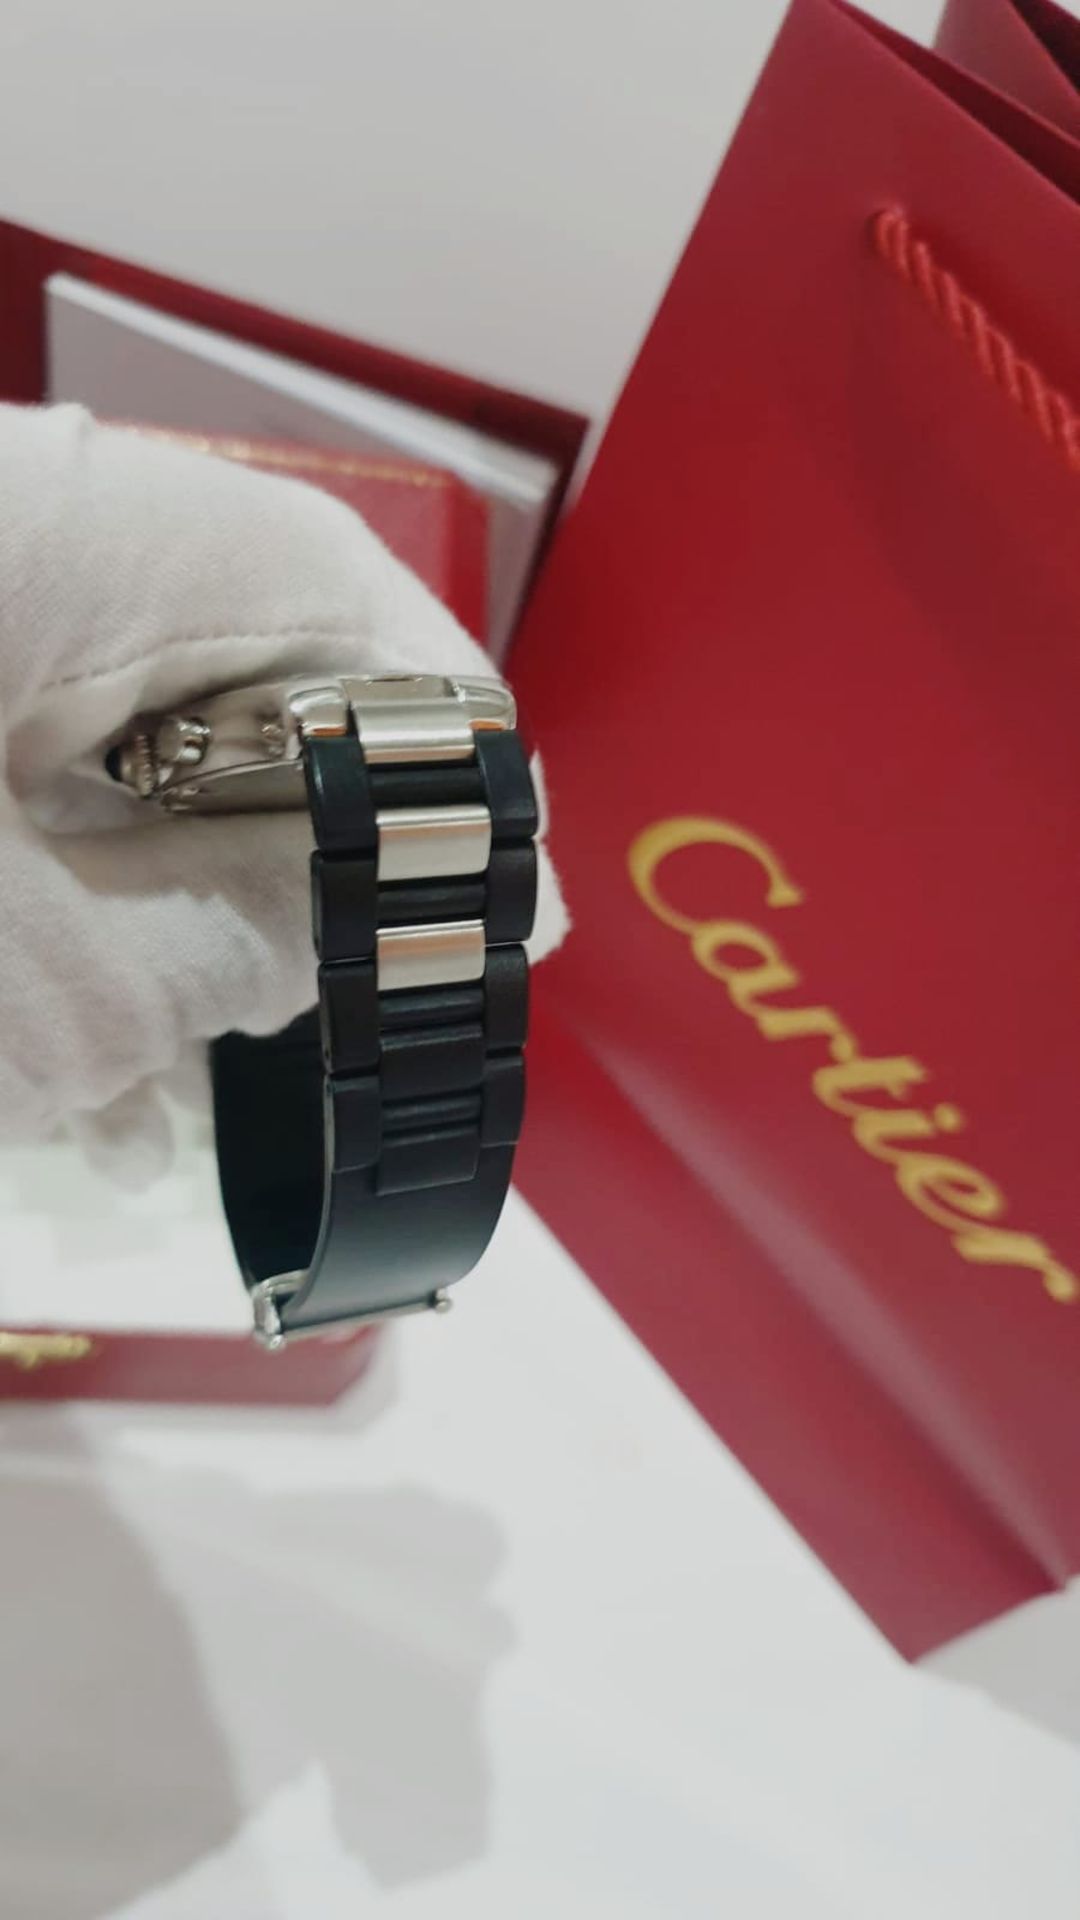 CARTIER MENS Watch Stainless Steel & Black, NO VAT - Image 6 of 9